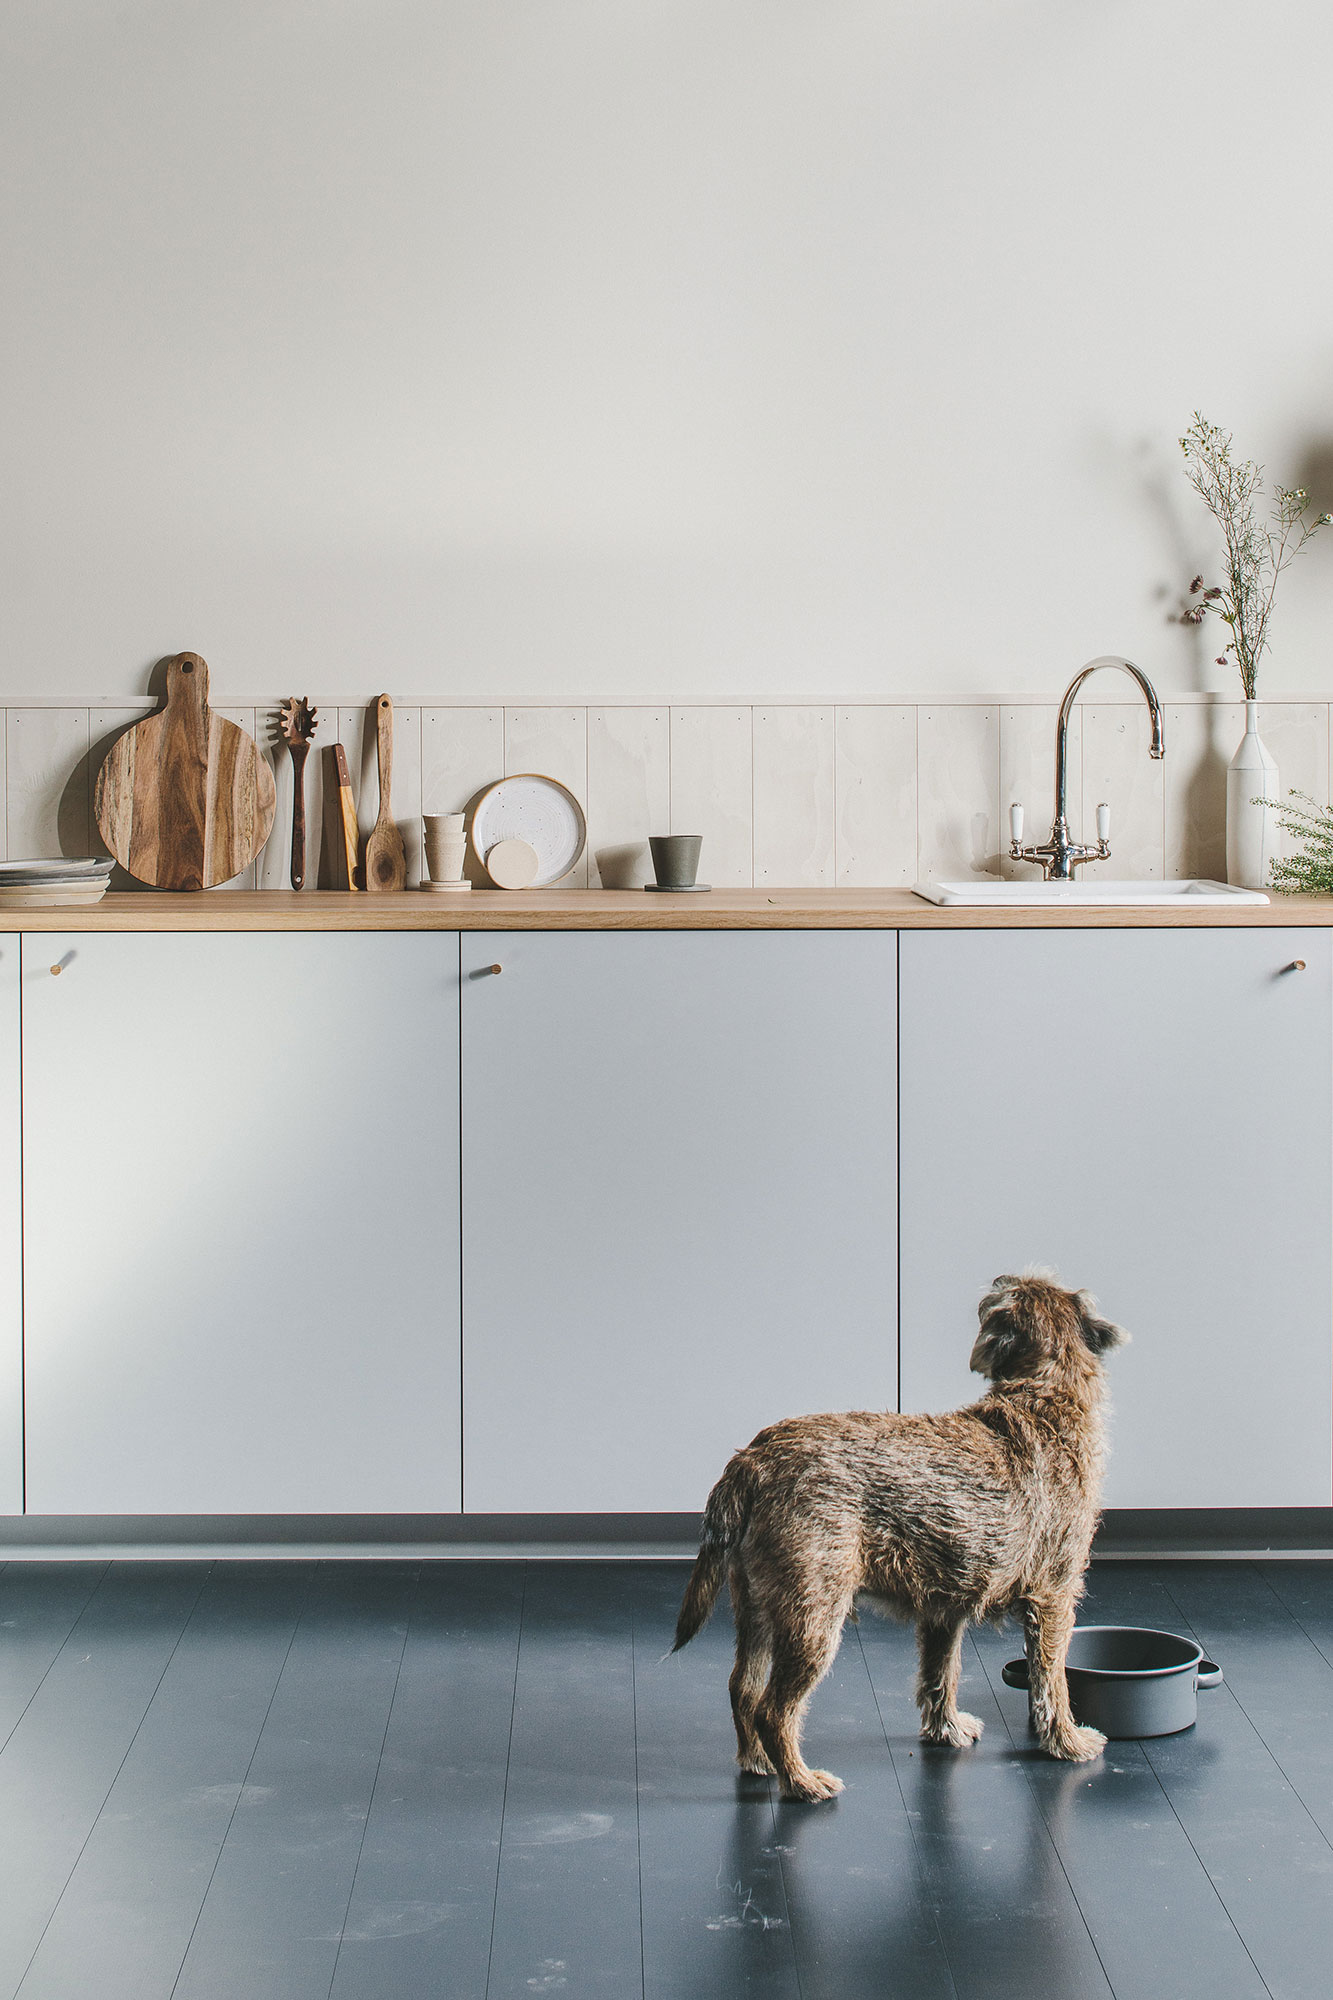 5 BRANDS THAT WILL ADD A NEW LEASE OF LIFE TO YOUR IKEA FURNITURE